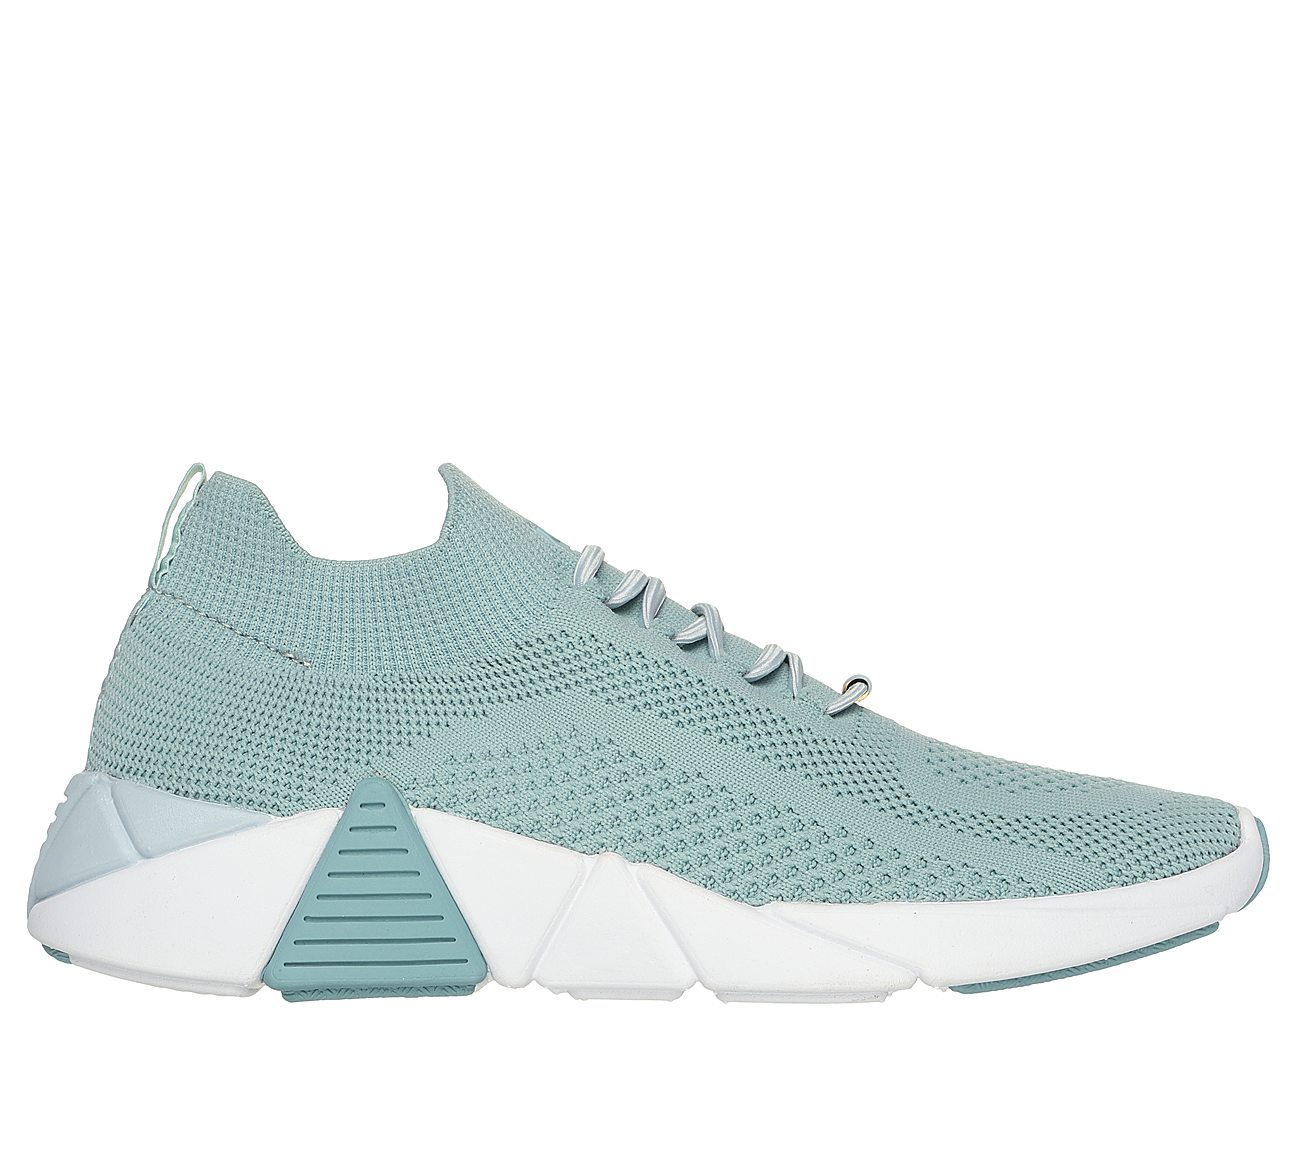 A-LINE - RIDER, SEAFOAM Footwear Lateral View